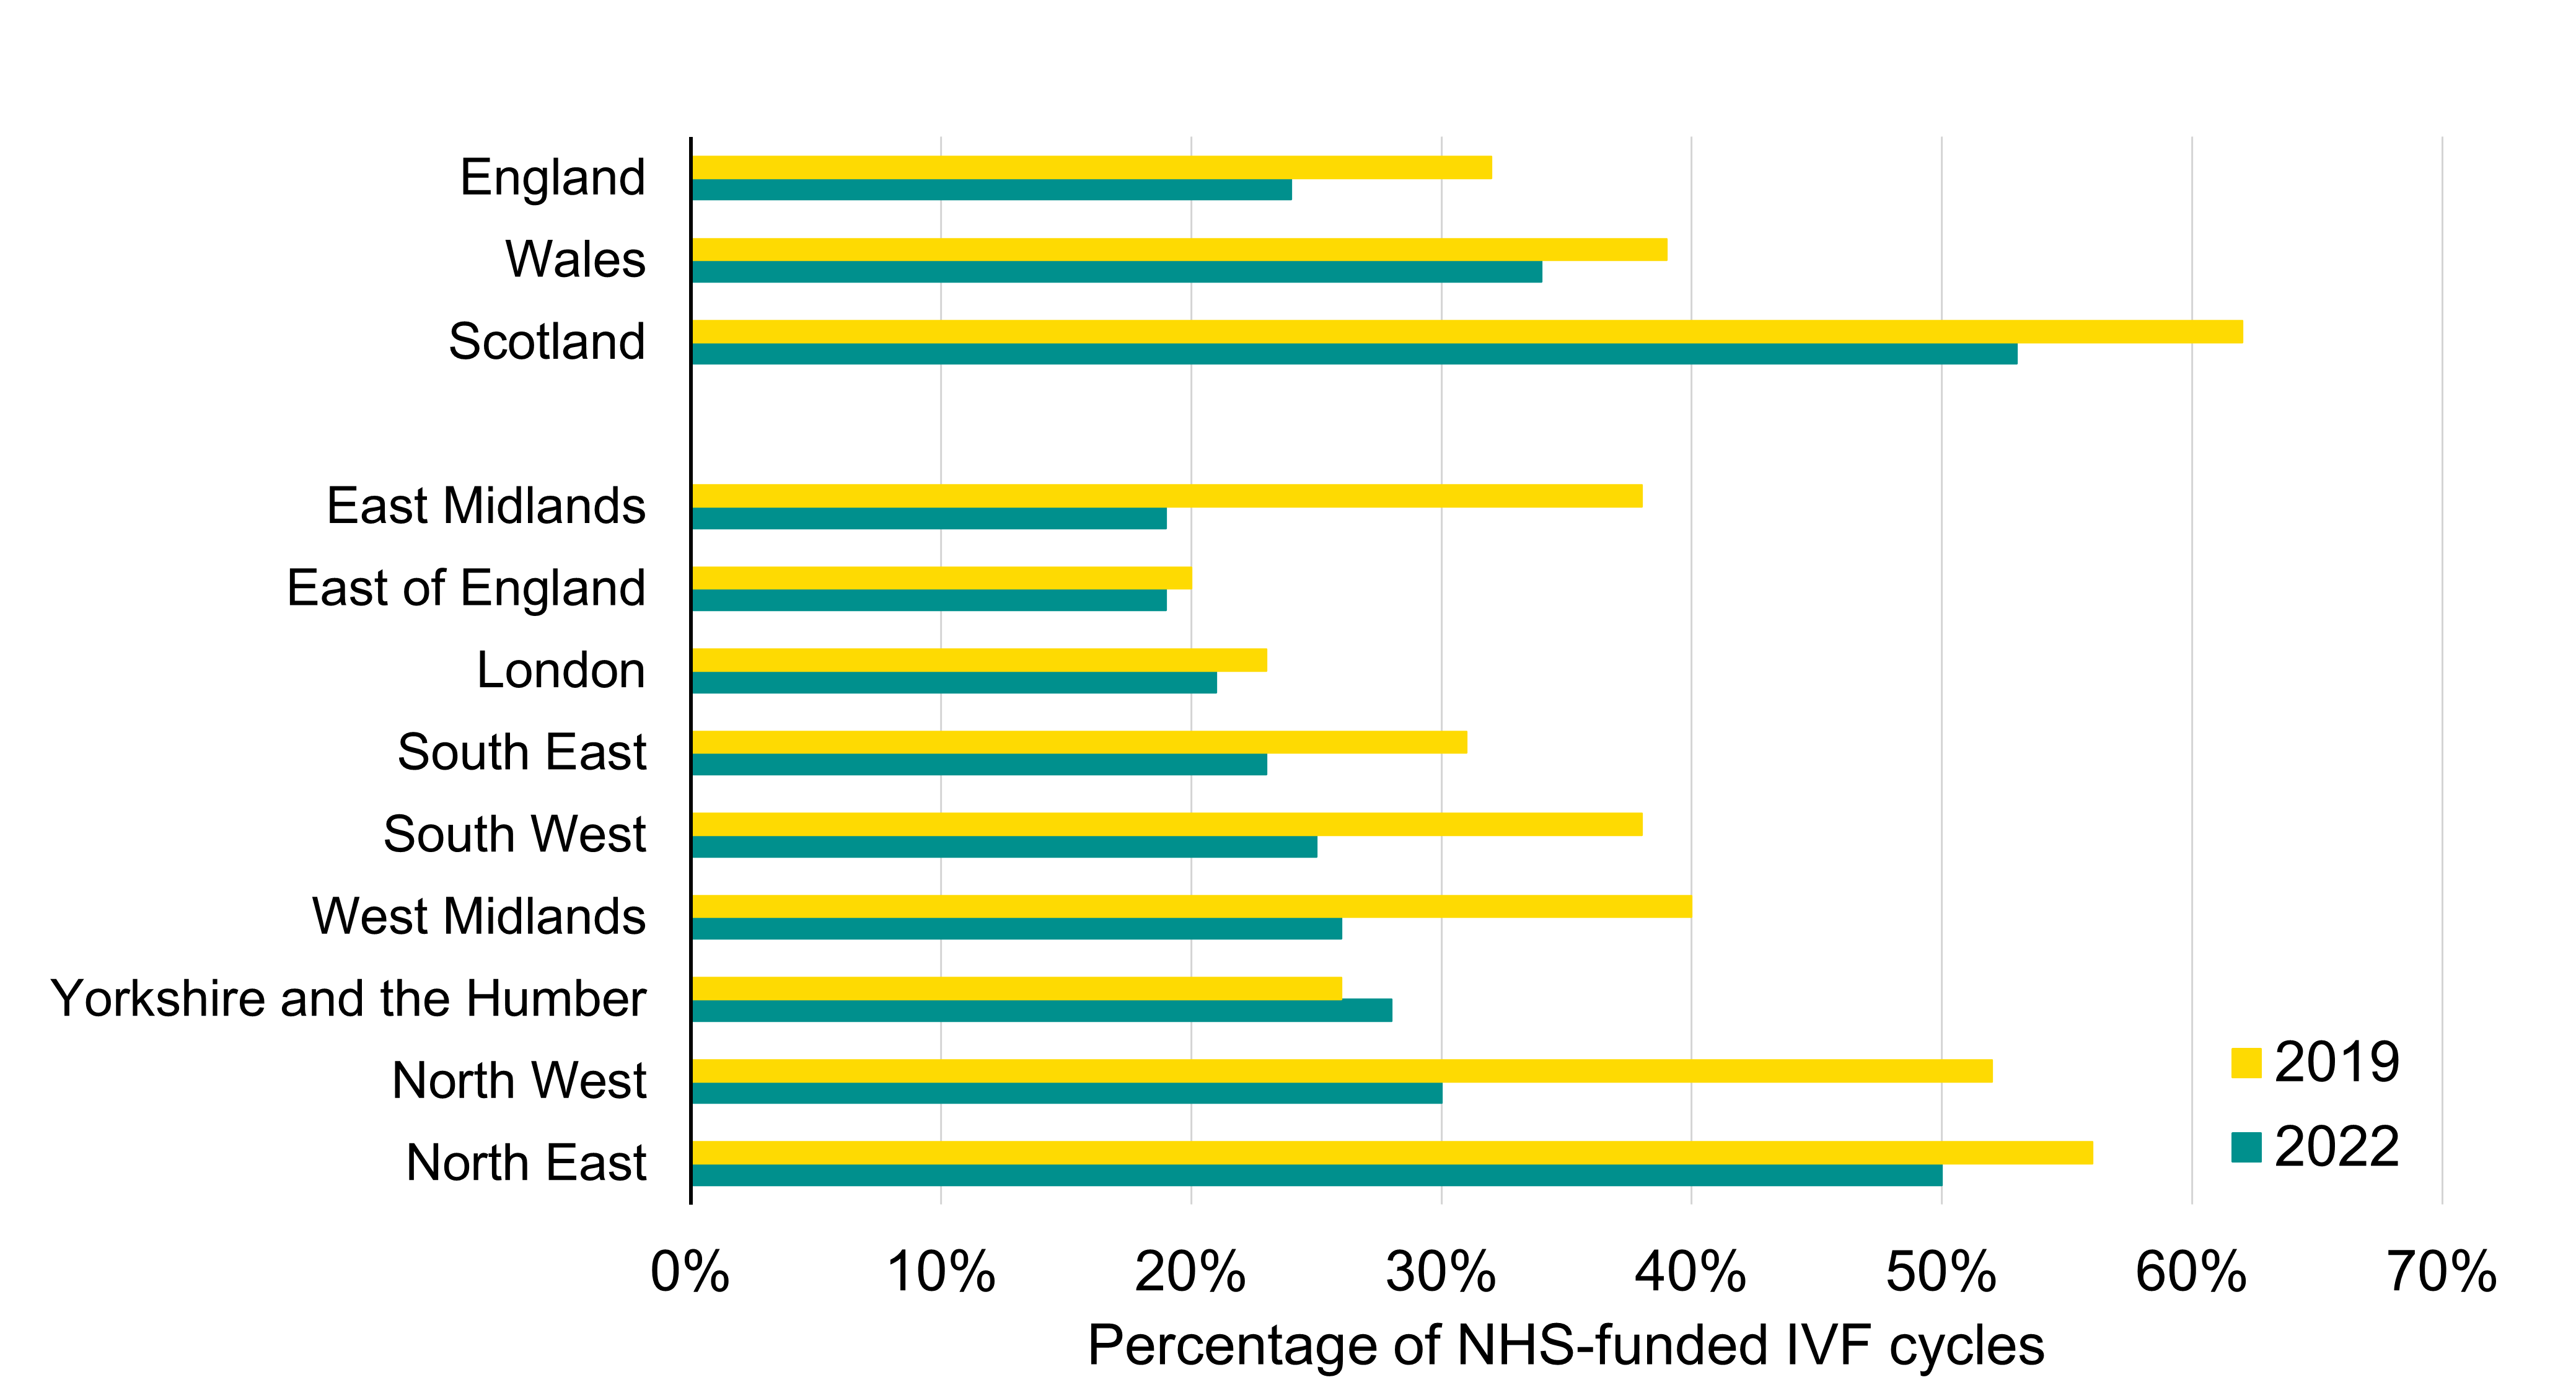 Bar graph showing regional decreases in the proportion of IVF cycles funded by the NHS since 2019.